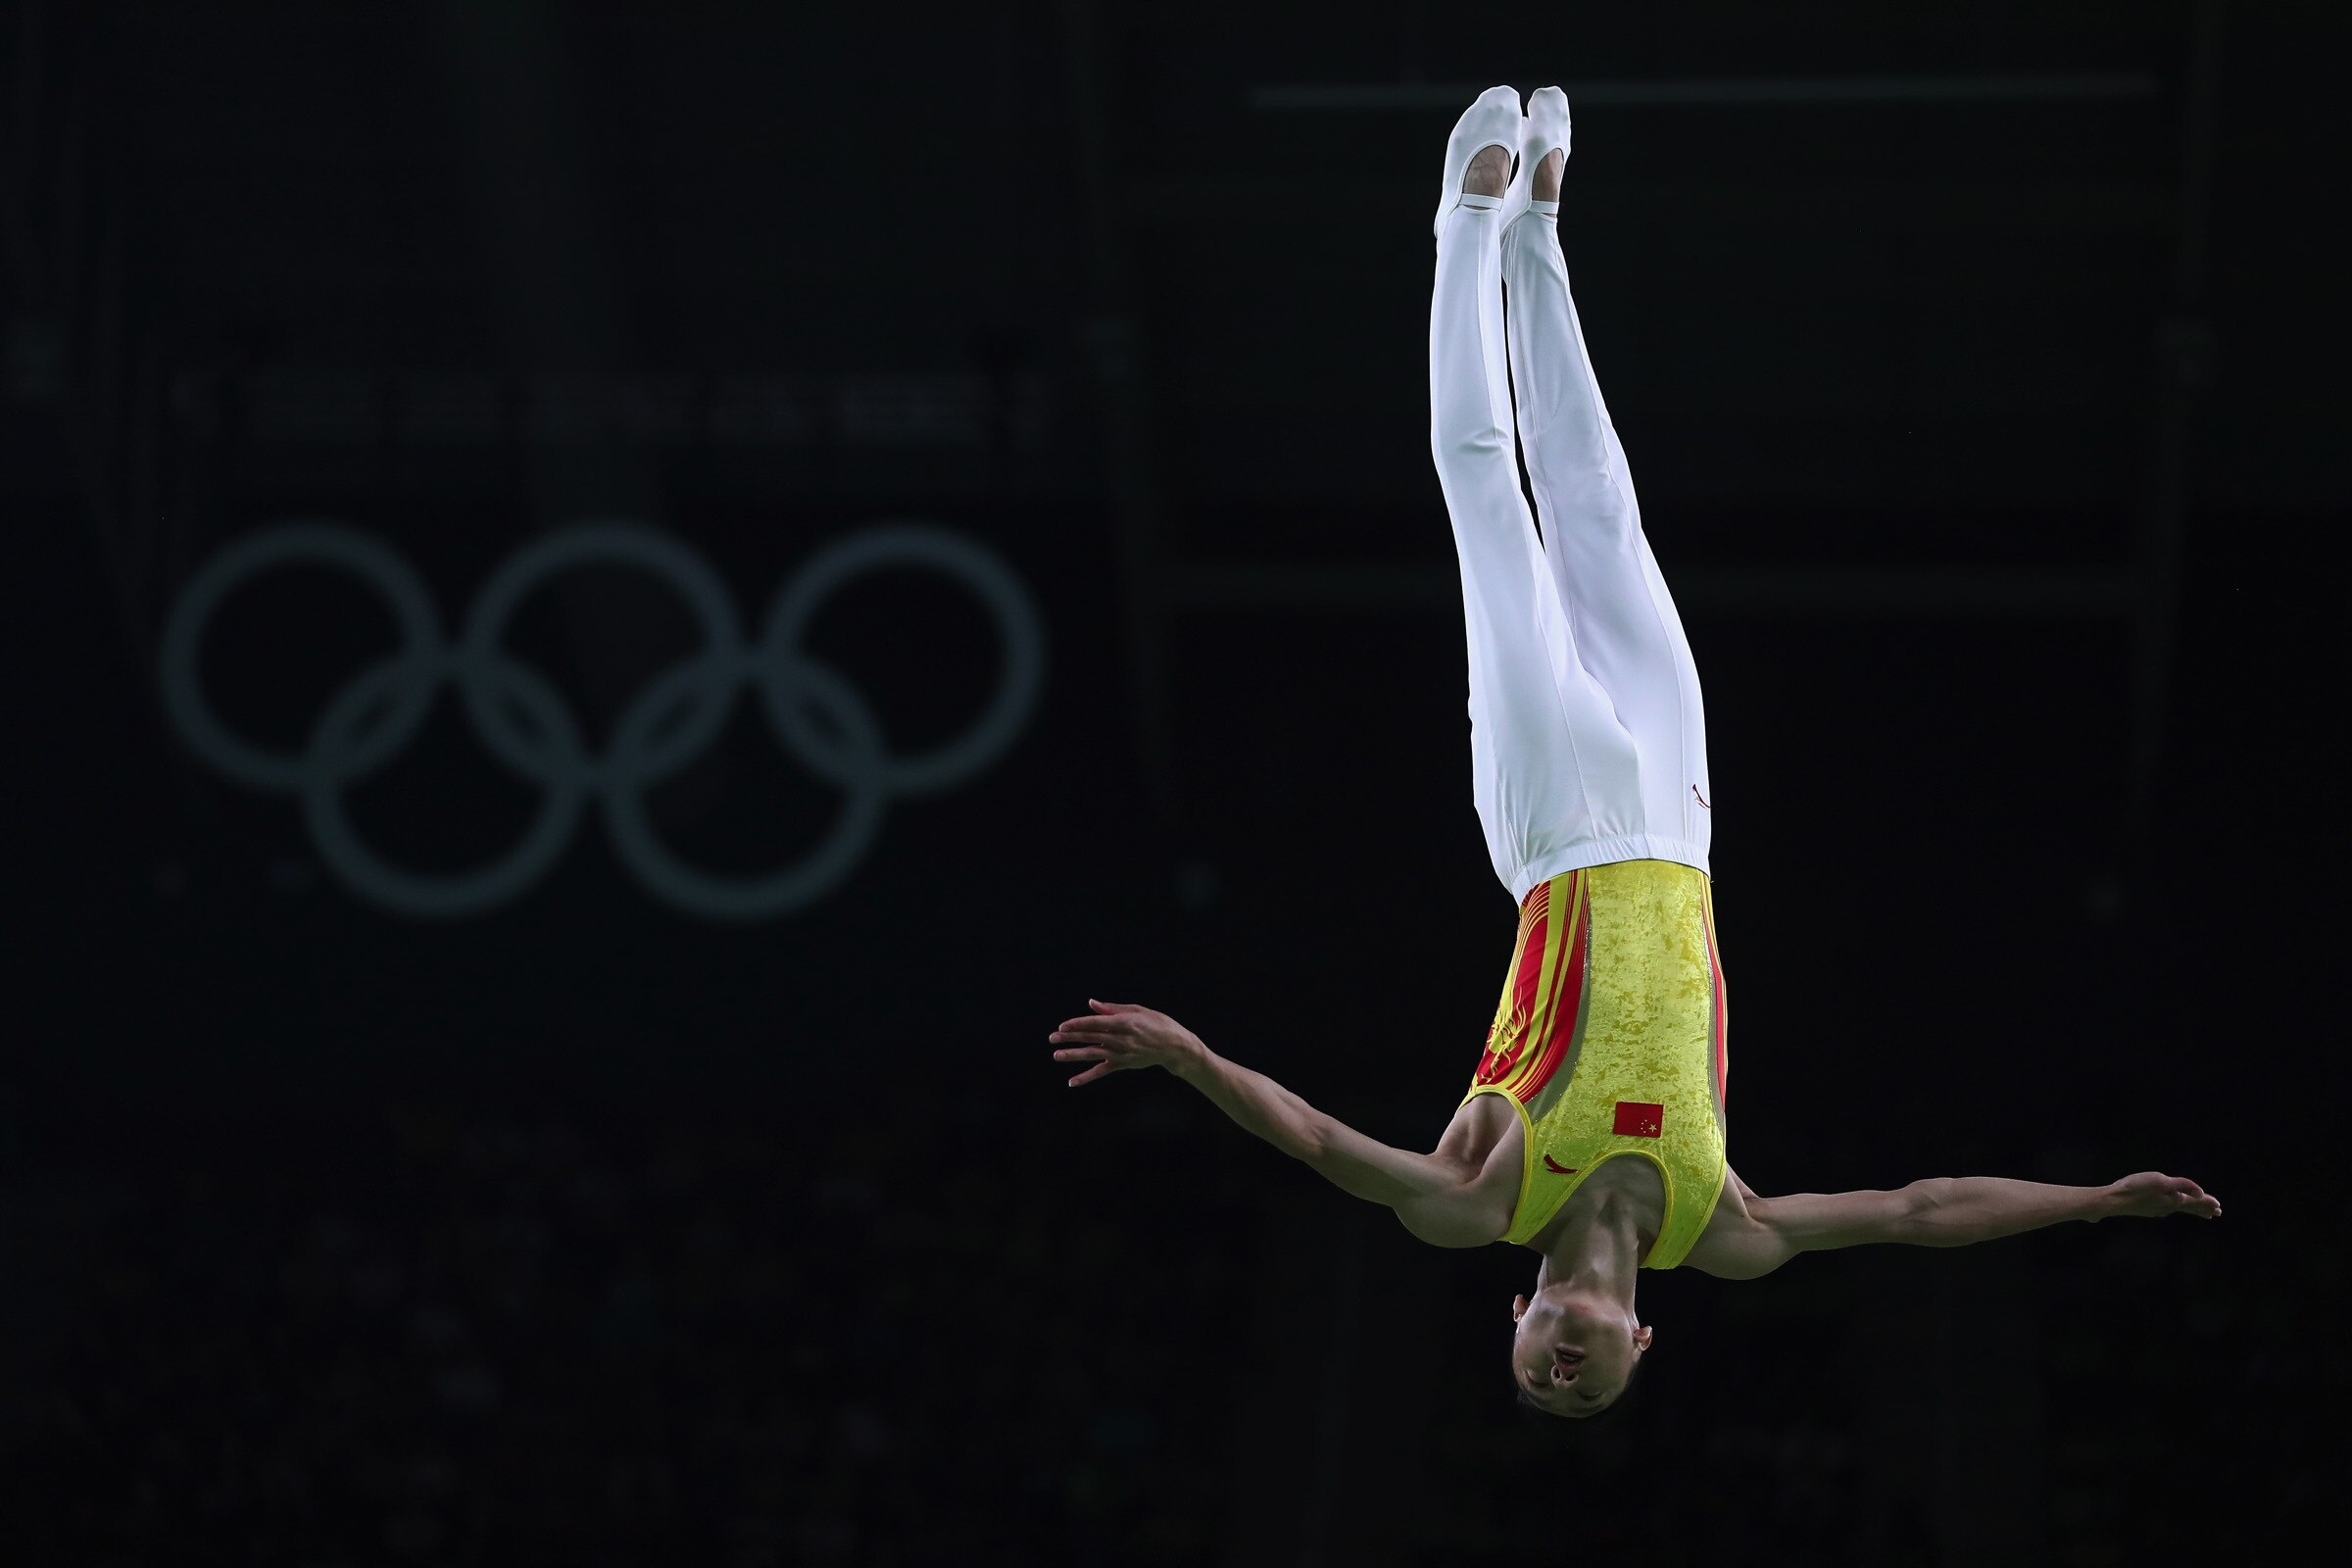 Trampoline gymnastics: A gymnast from China performs acrobatics in the air at the Summer Olympic Games. 2400x1600 HD Wallpaper.